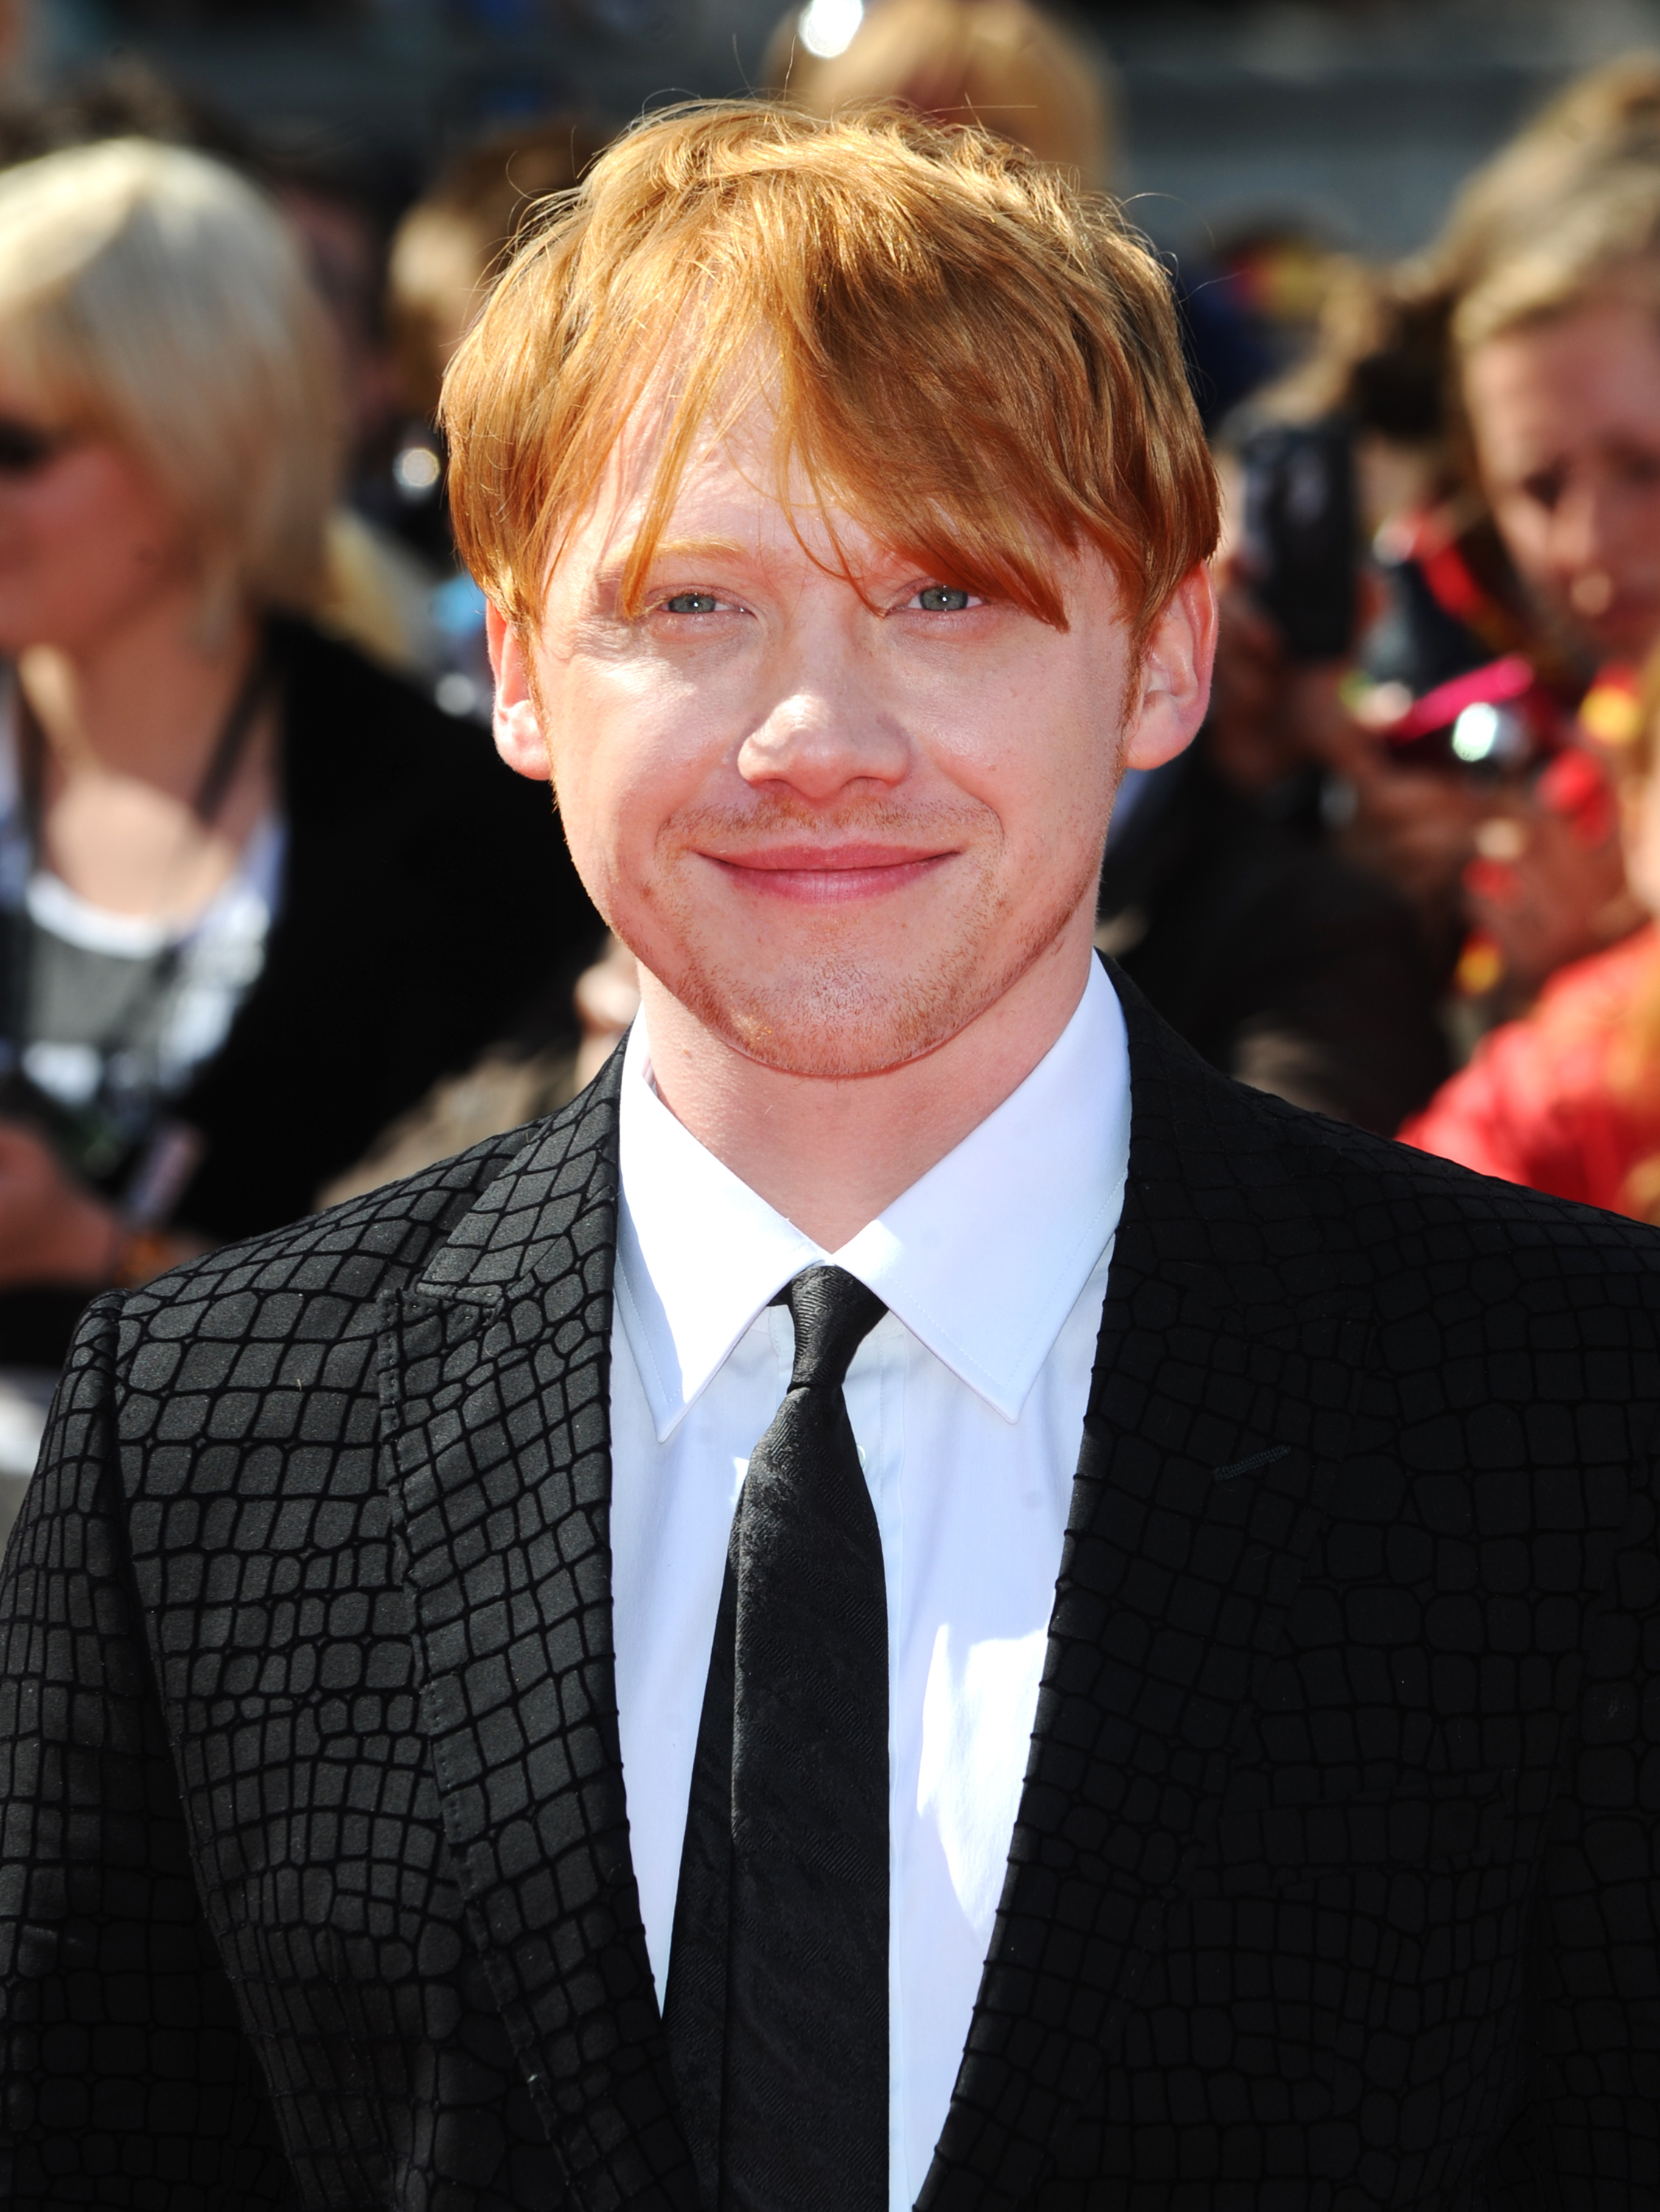 Rupert Grint at the 2011 London Premiere of Harry Potter and the Deathly Hallows: Part 2